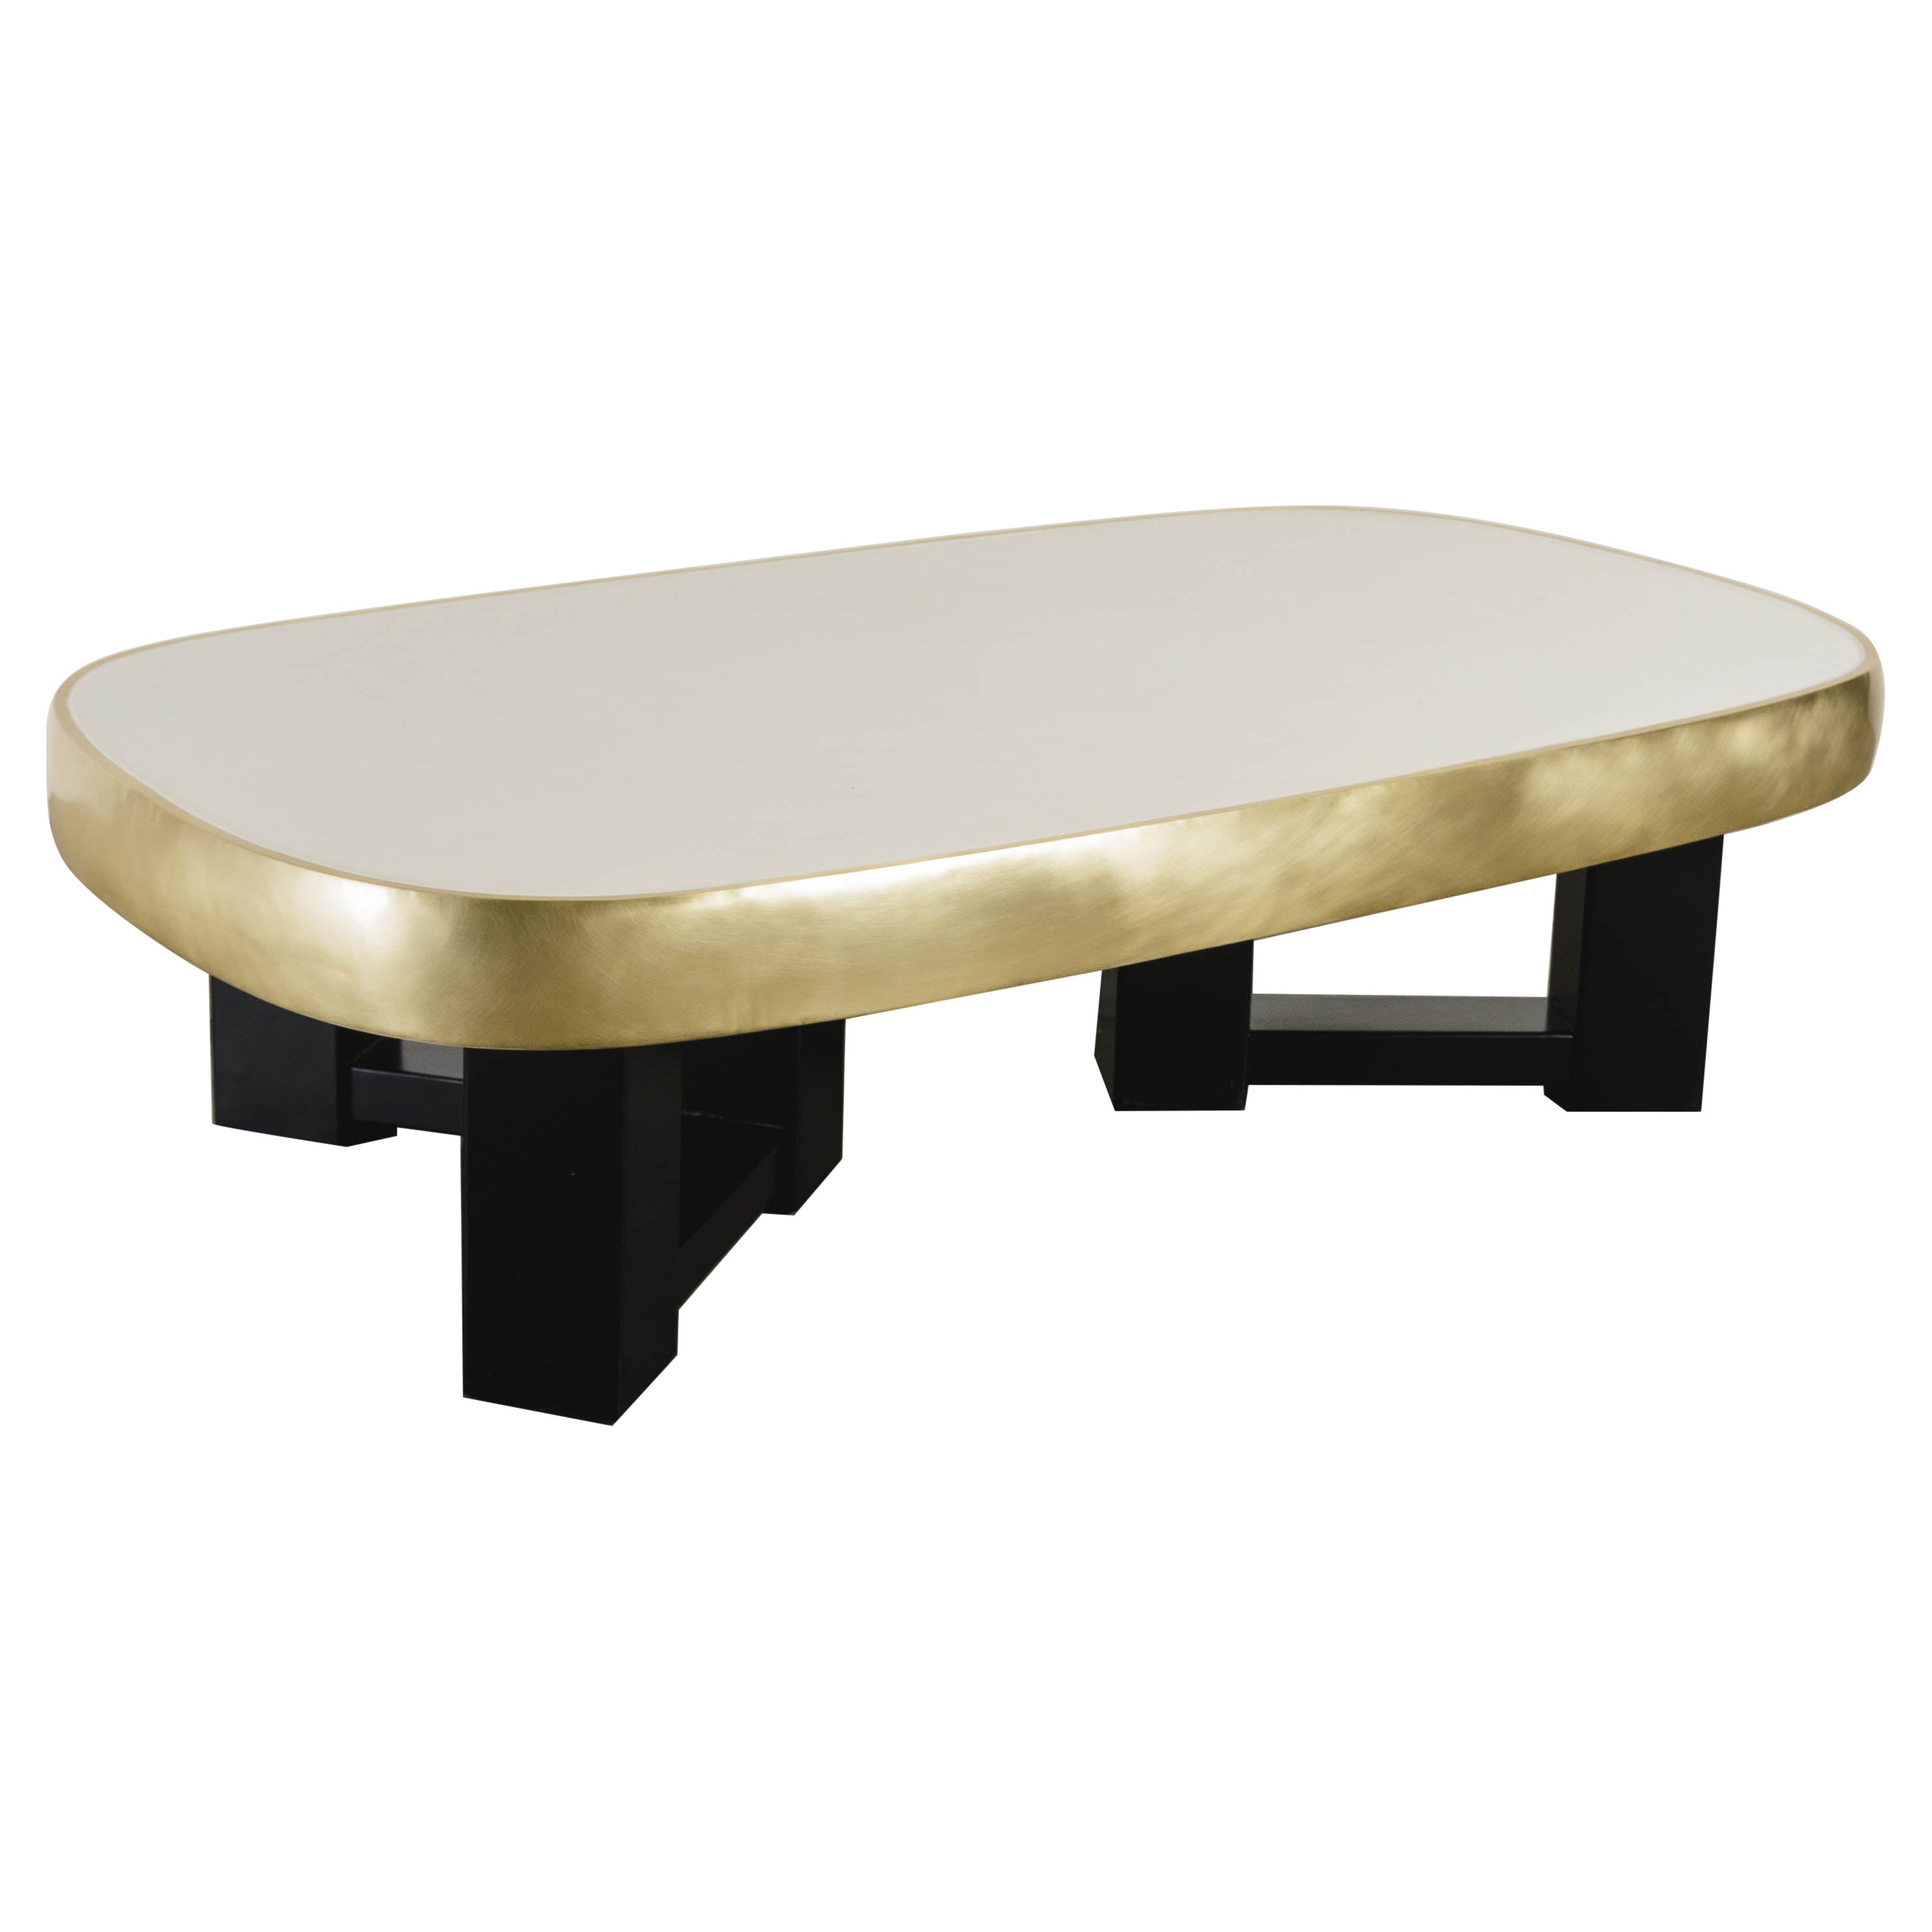 Contemporary Cream Lacquer Oblong Cocktail Table with Brass Trim by Robert Kuo For Sale